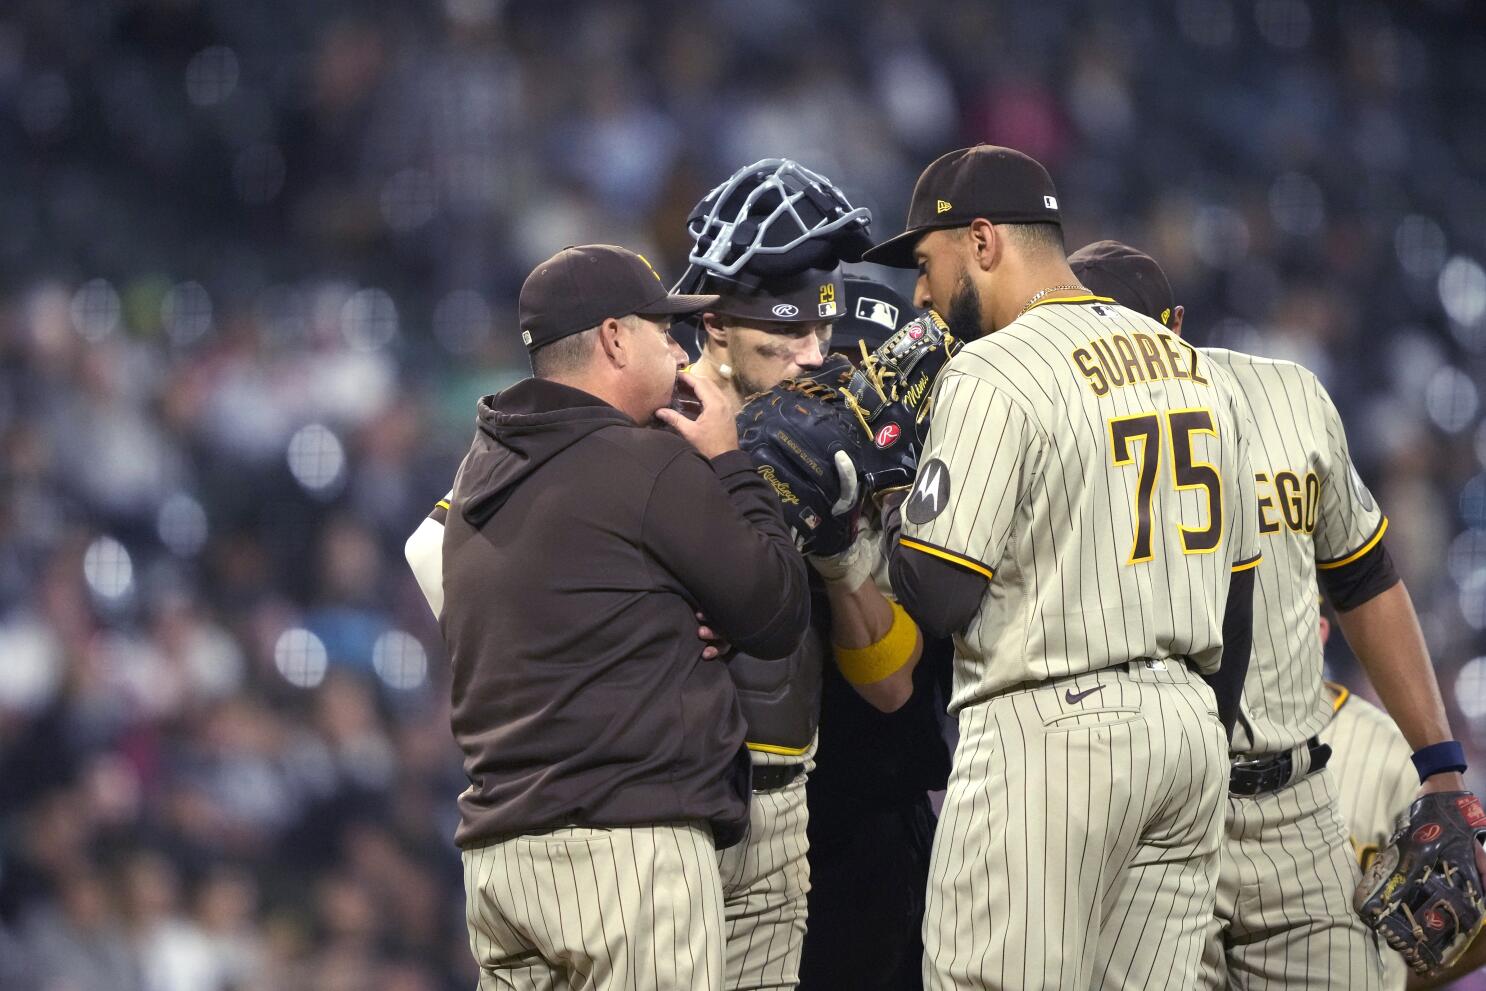 High-spending Padres eliminated despite 3-2 win over White Sox, Sports